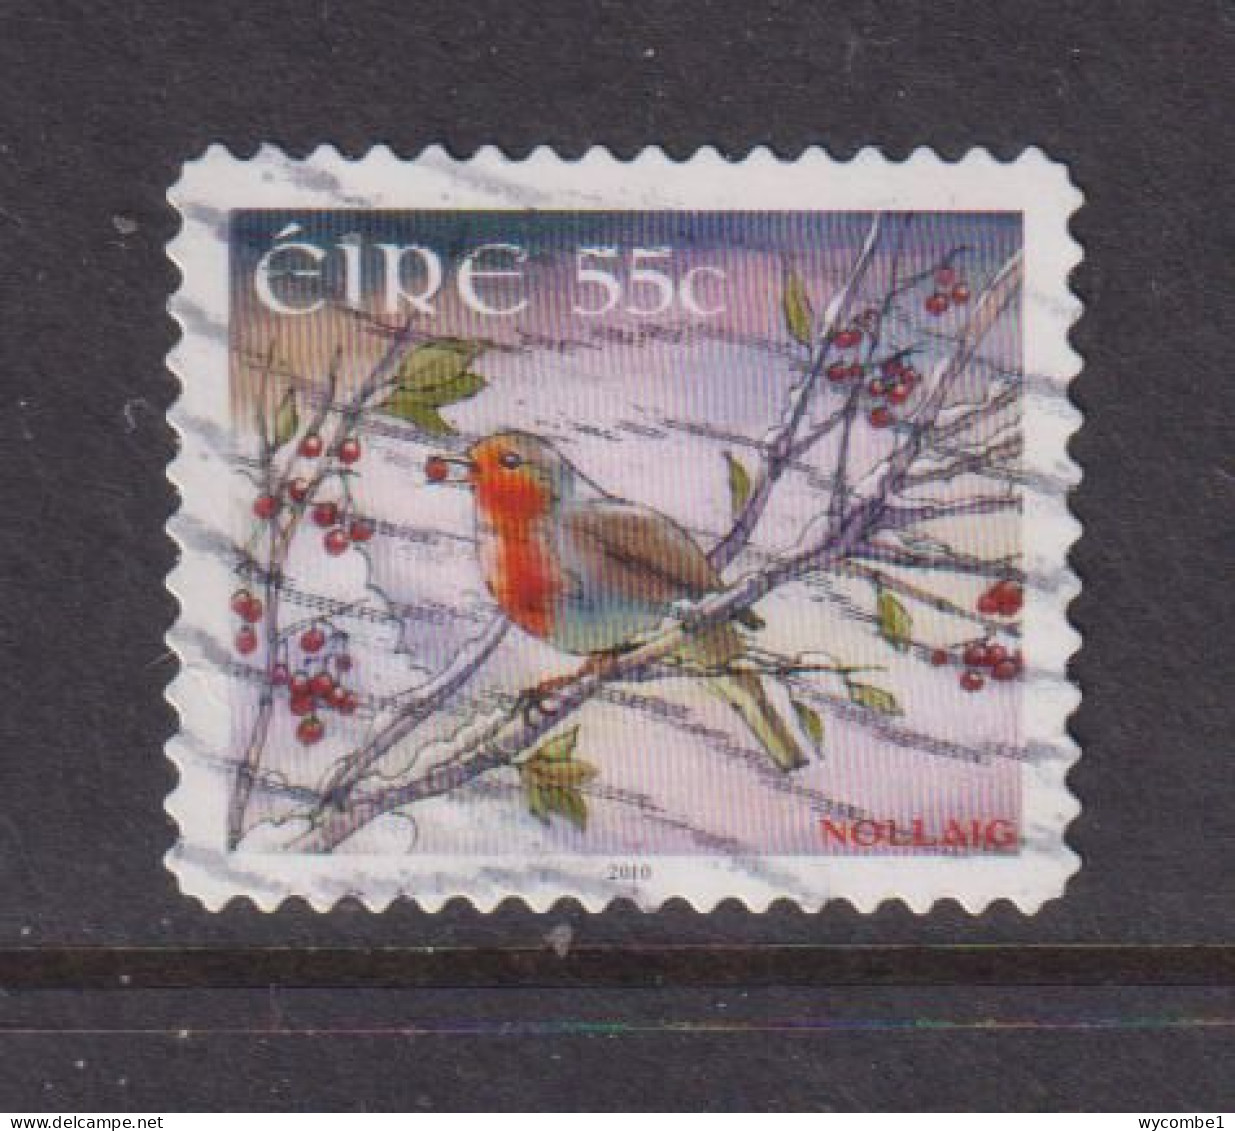 IRELAND  -  2010  Christmas  55c  Self Adhesive  Used As Scan - Used Stamps